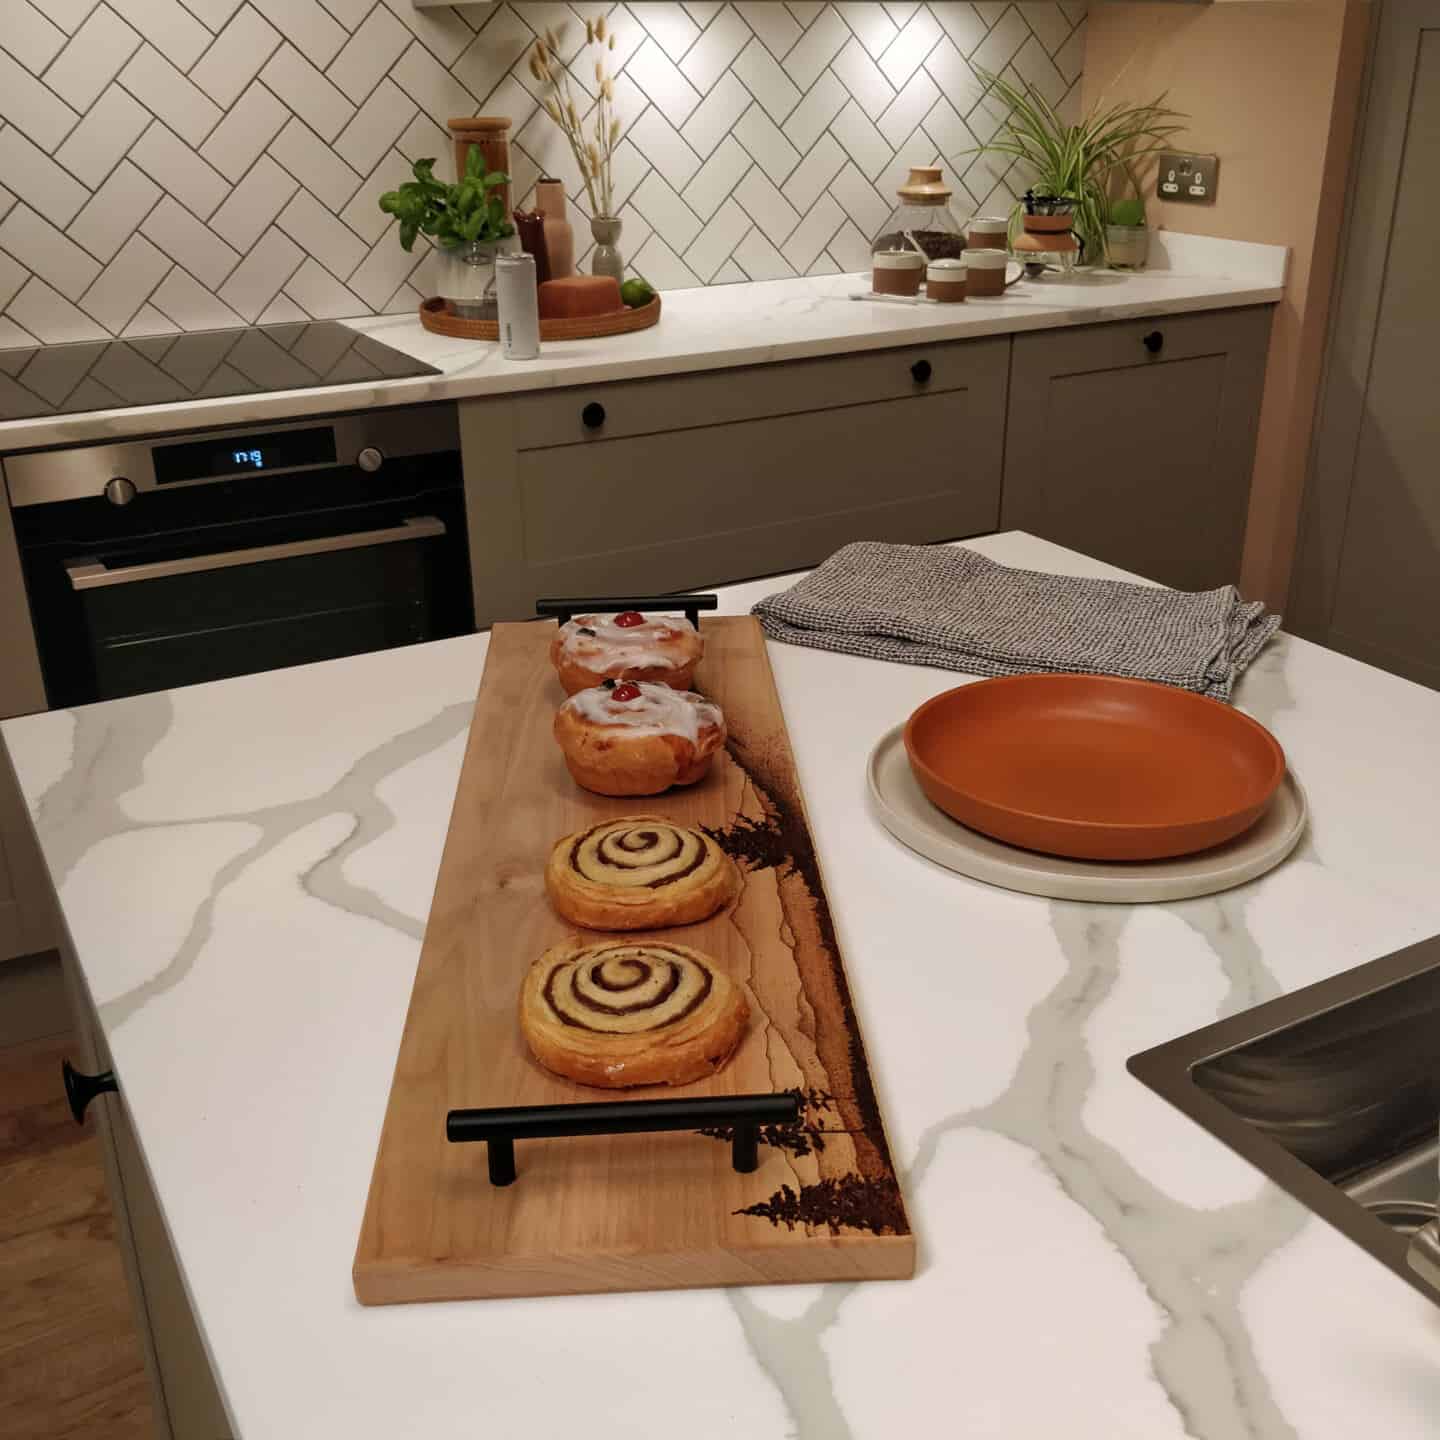 Biophilic kitchen designs provide a multi-sensory experience through natural materials and textures. Here kitchen accessories are displayed on a marble effect worktop.